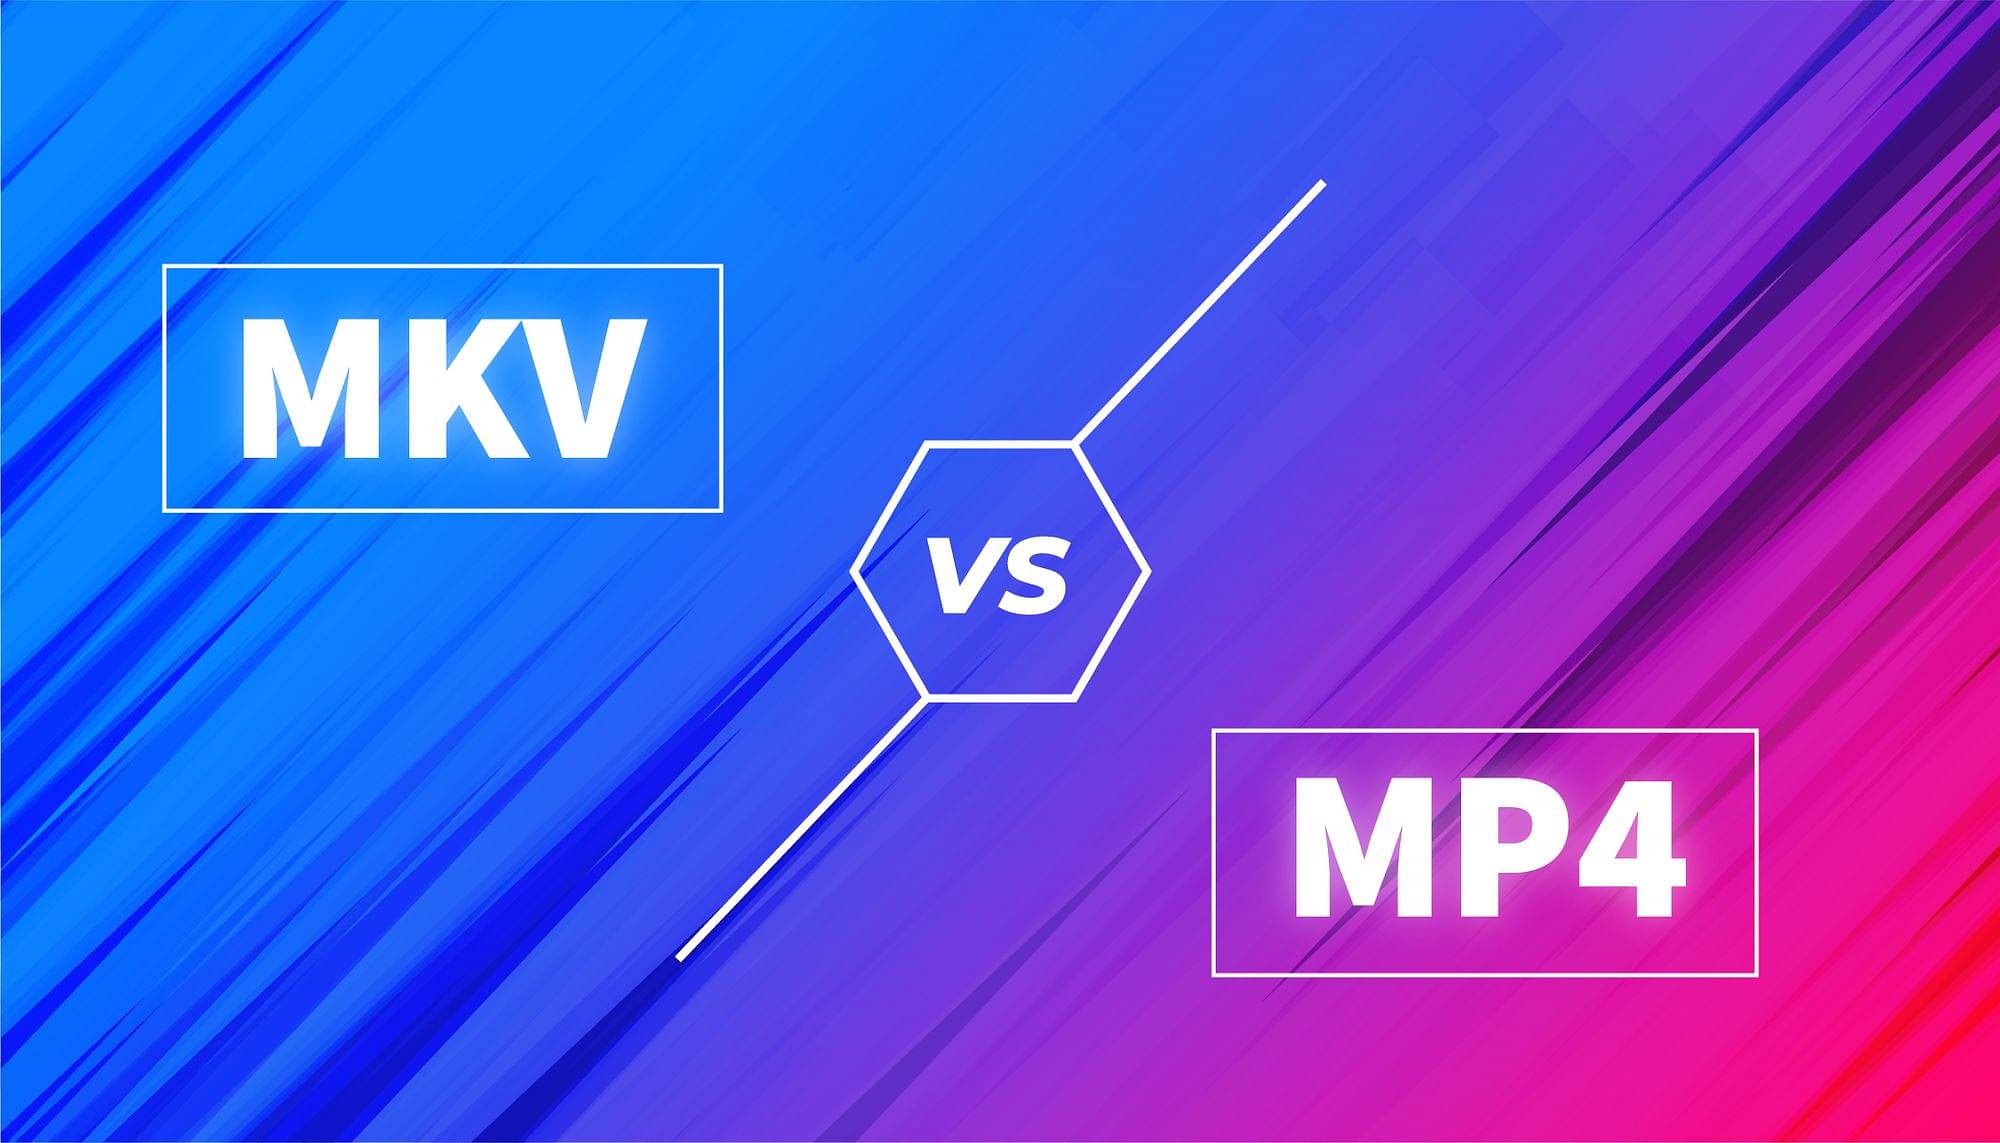 MKV vs MP4 - Which Video Streaming Format is Better?